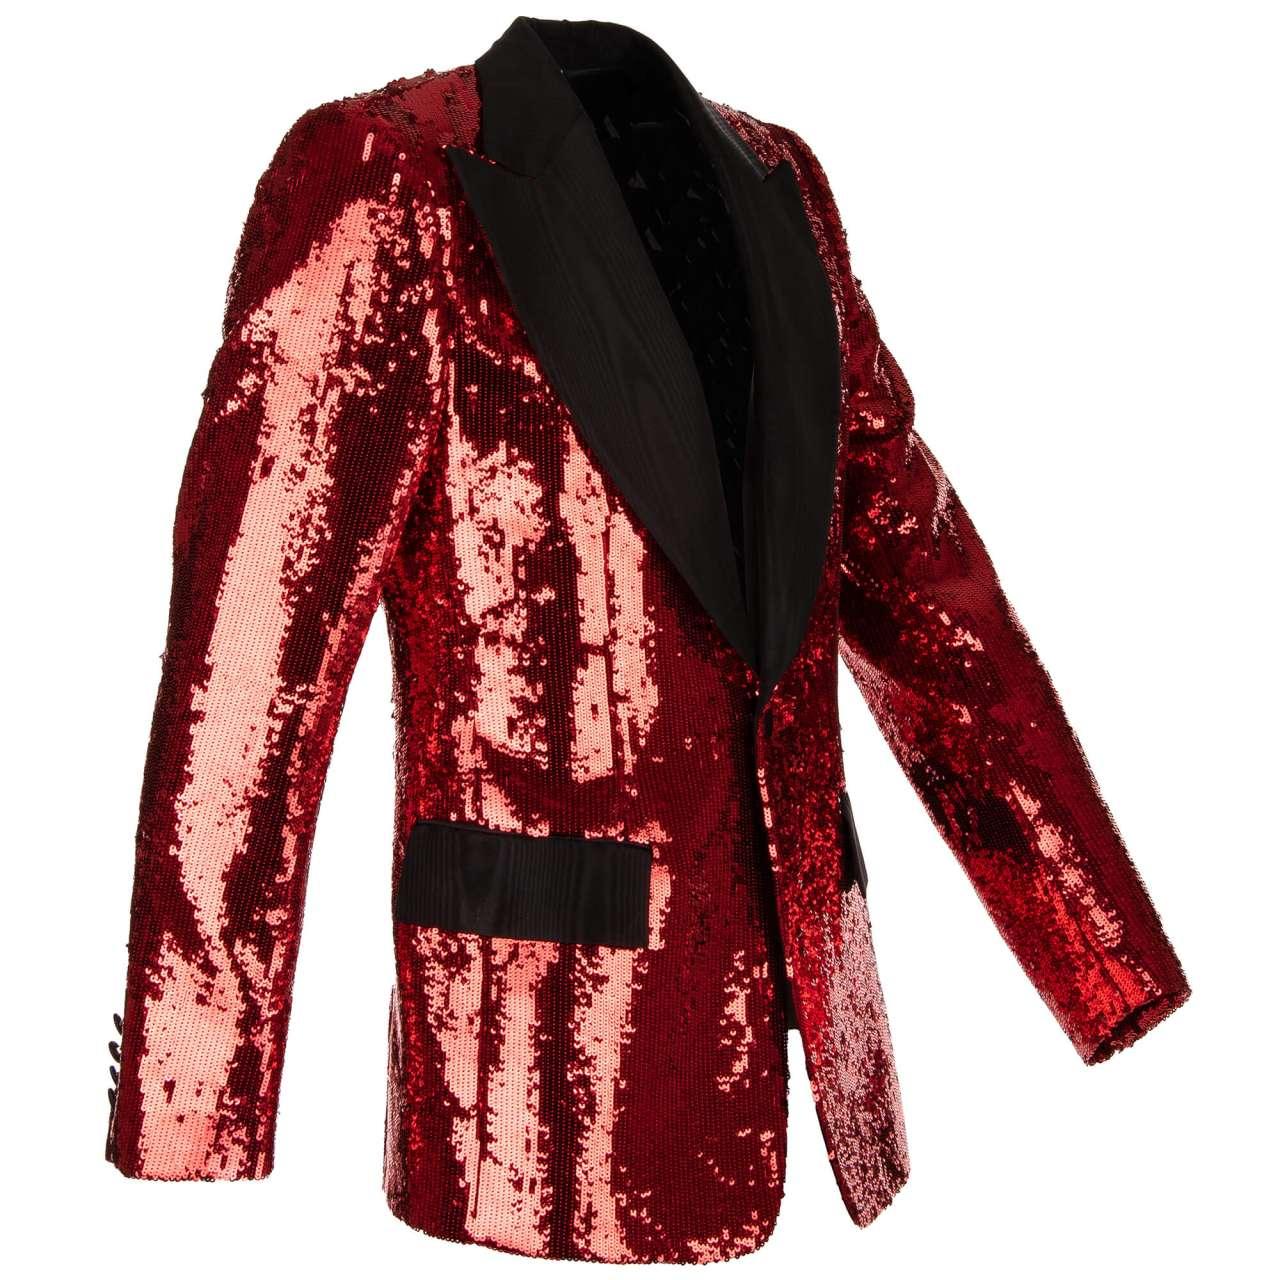 Dolce & Gabbana - Sequined Tuxedo Blazer with Moire Lapel Red Black 48 In Excellent Condition For Sale In Erkrath, DE